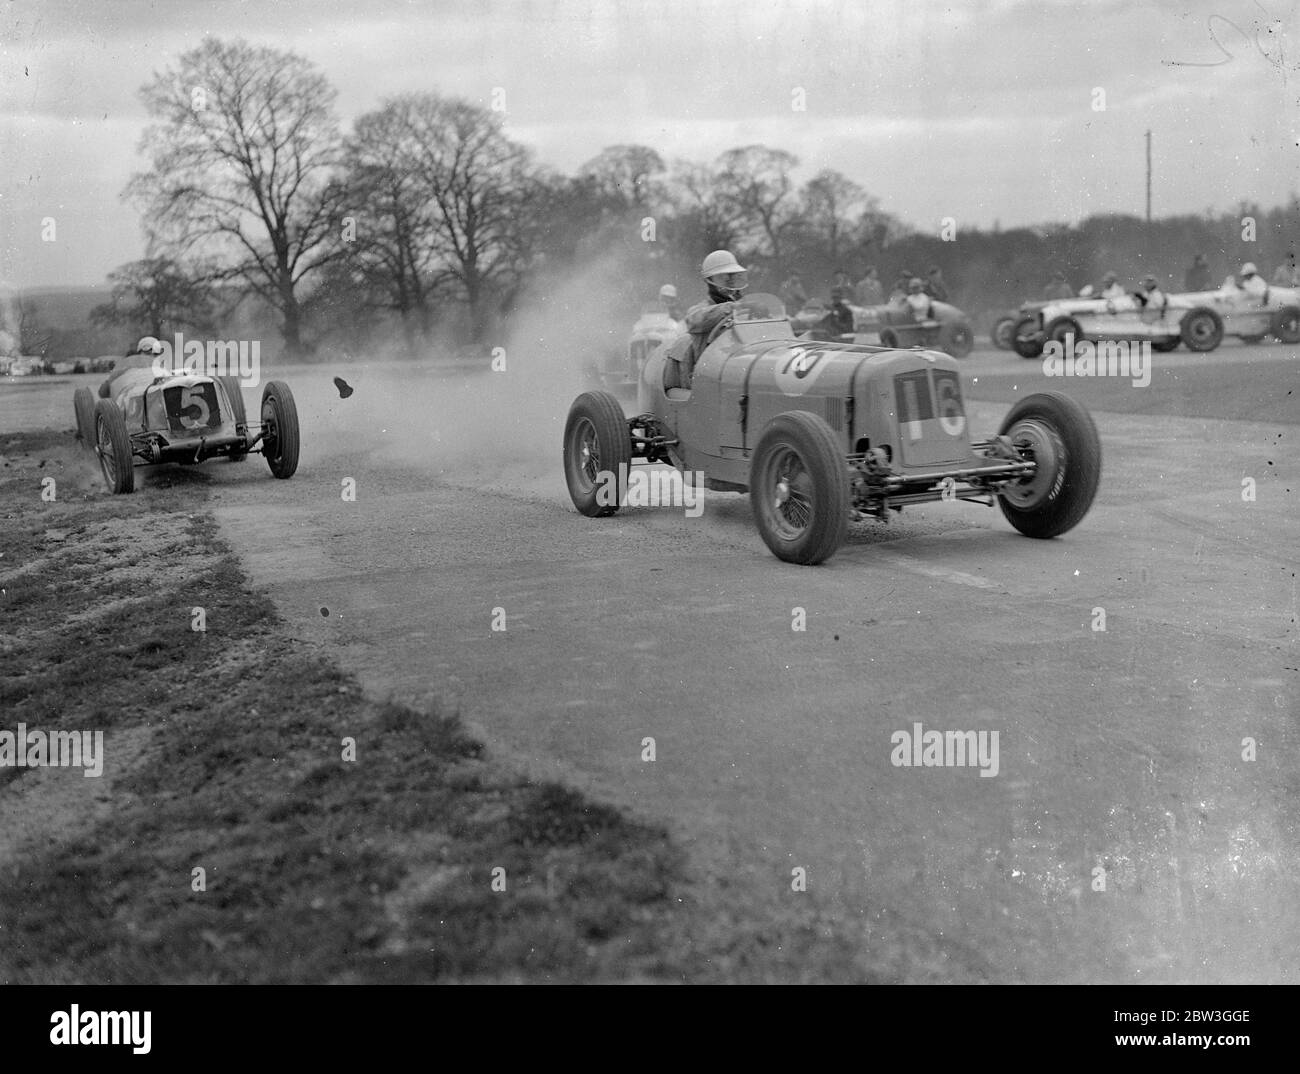 Seaman driving single handed , wins British Empire road race . Driving witout relief for the whole 250 miles of the course , R J B Seaman ( Maserati ) won the British Empire trophy race , the first big car race of the season at Donington Park , Derby . He averaged 66.33 miles per hour . P S Fairfield ( E F A ) was second and W C Everitt ( Alfa Romeo ) was third . Twenty seven of Britain ' s finest drivers competed in the event . Photo shows , Prince Bira of Siam driving and ERA ( No 16 ) leading during the race closely followed by Wal Handley driving a Riley ( No 5 ) . Handley crashed shortly Stock Photo